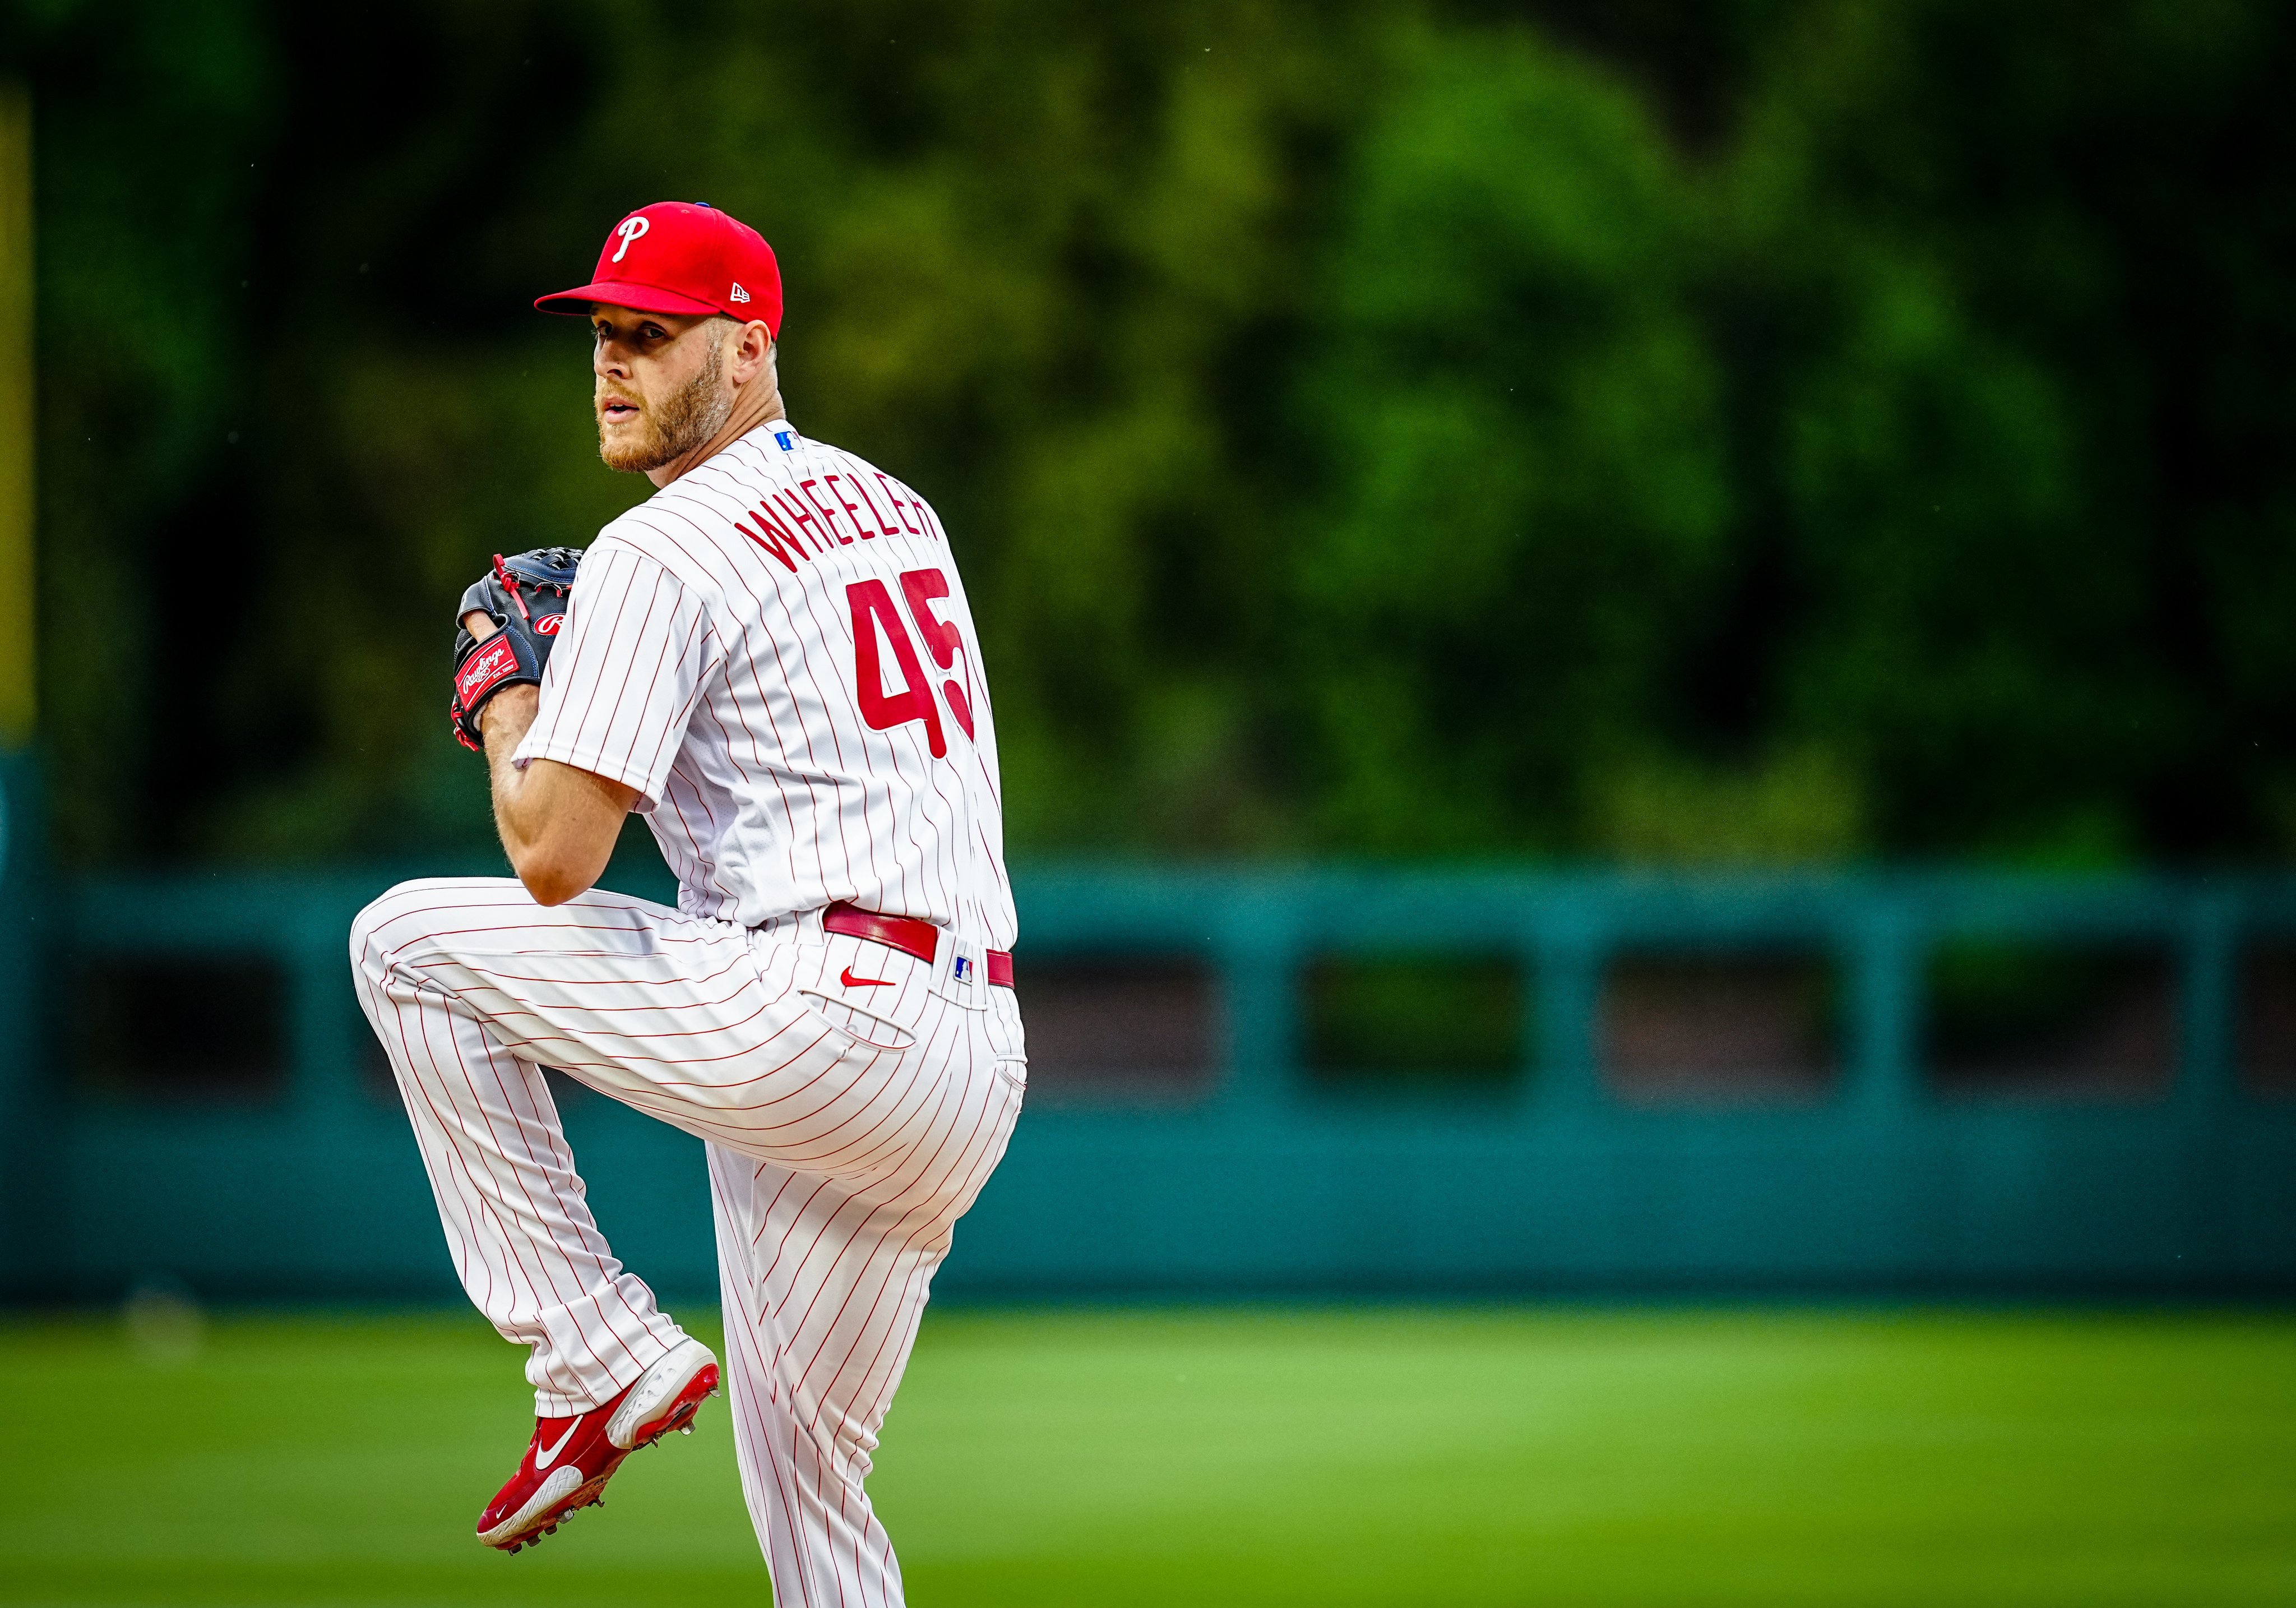 Philadelphia Phillies - Zack Wheeler, wearing the red pinstripe uniform,  about to throw a pitch.